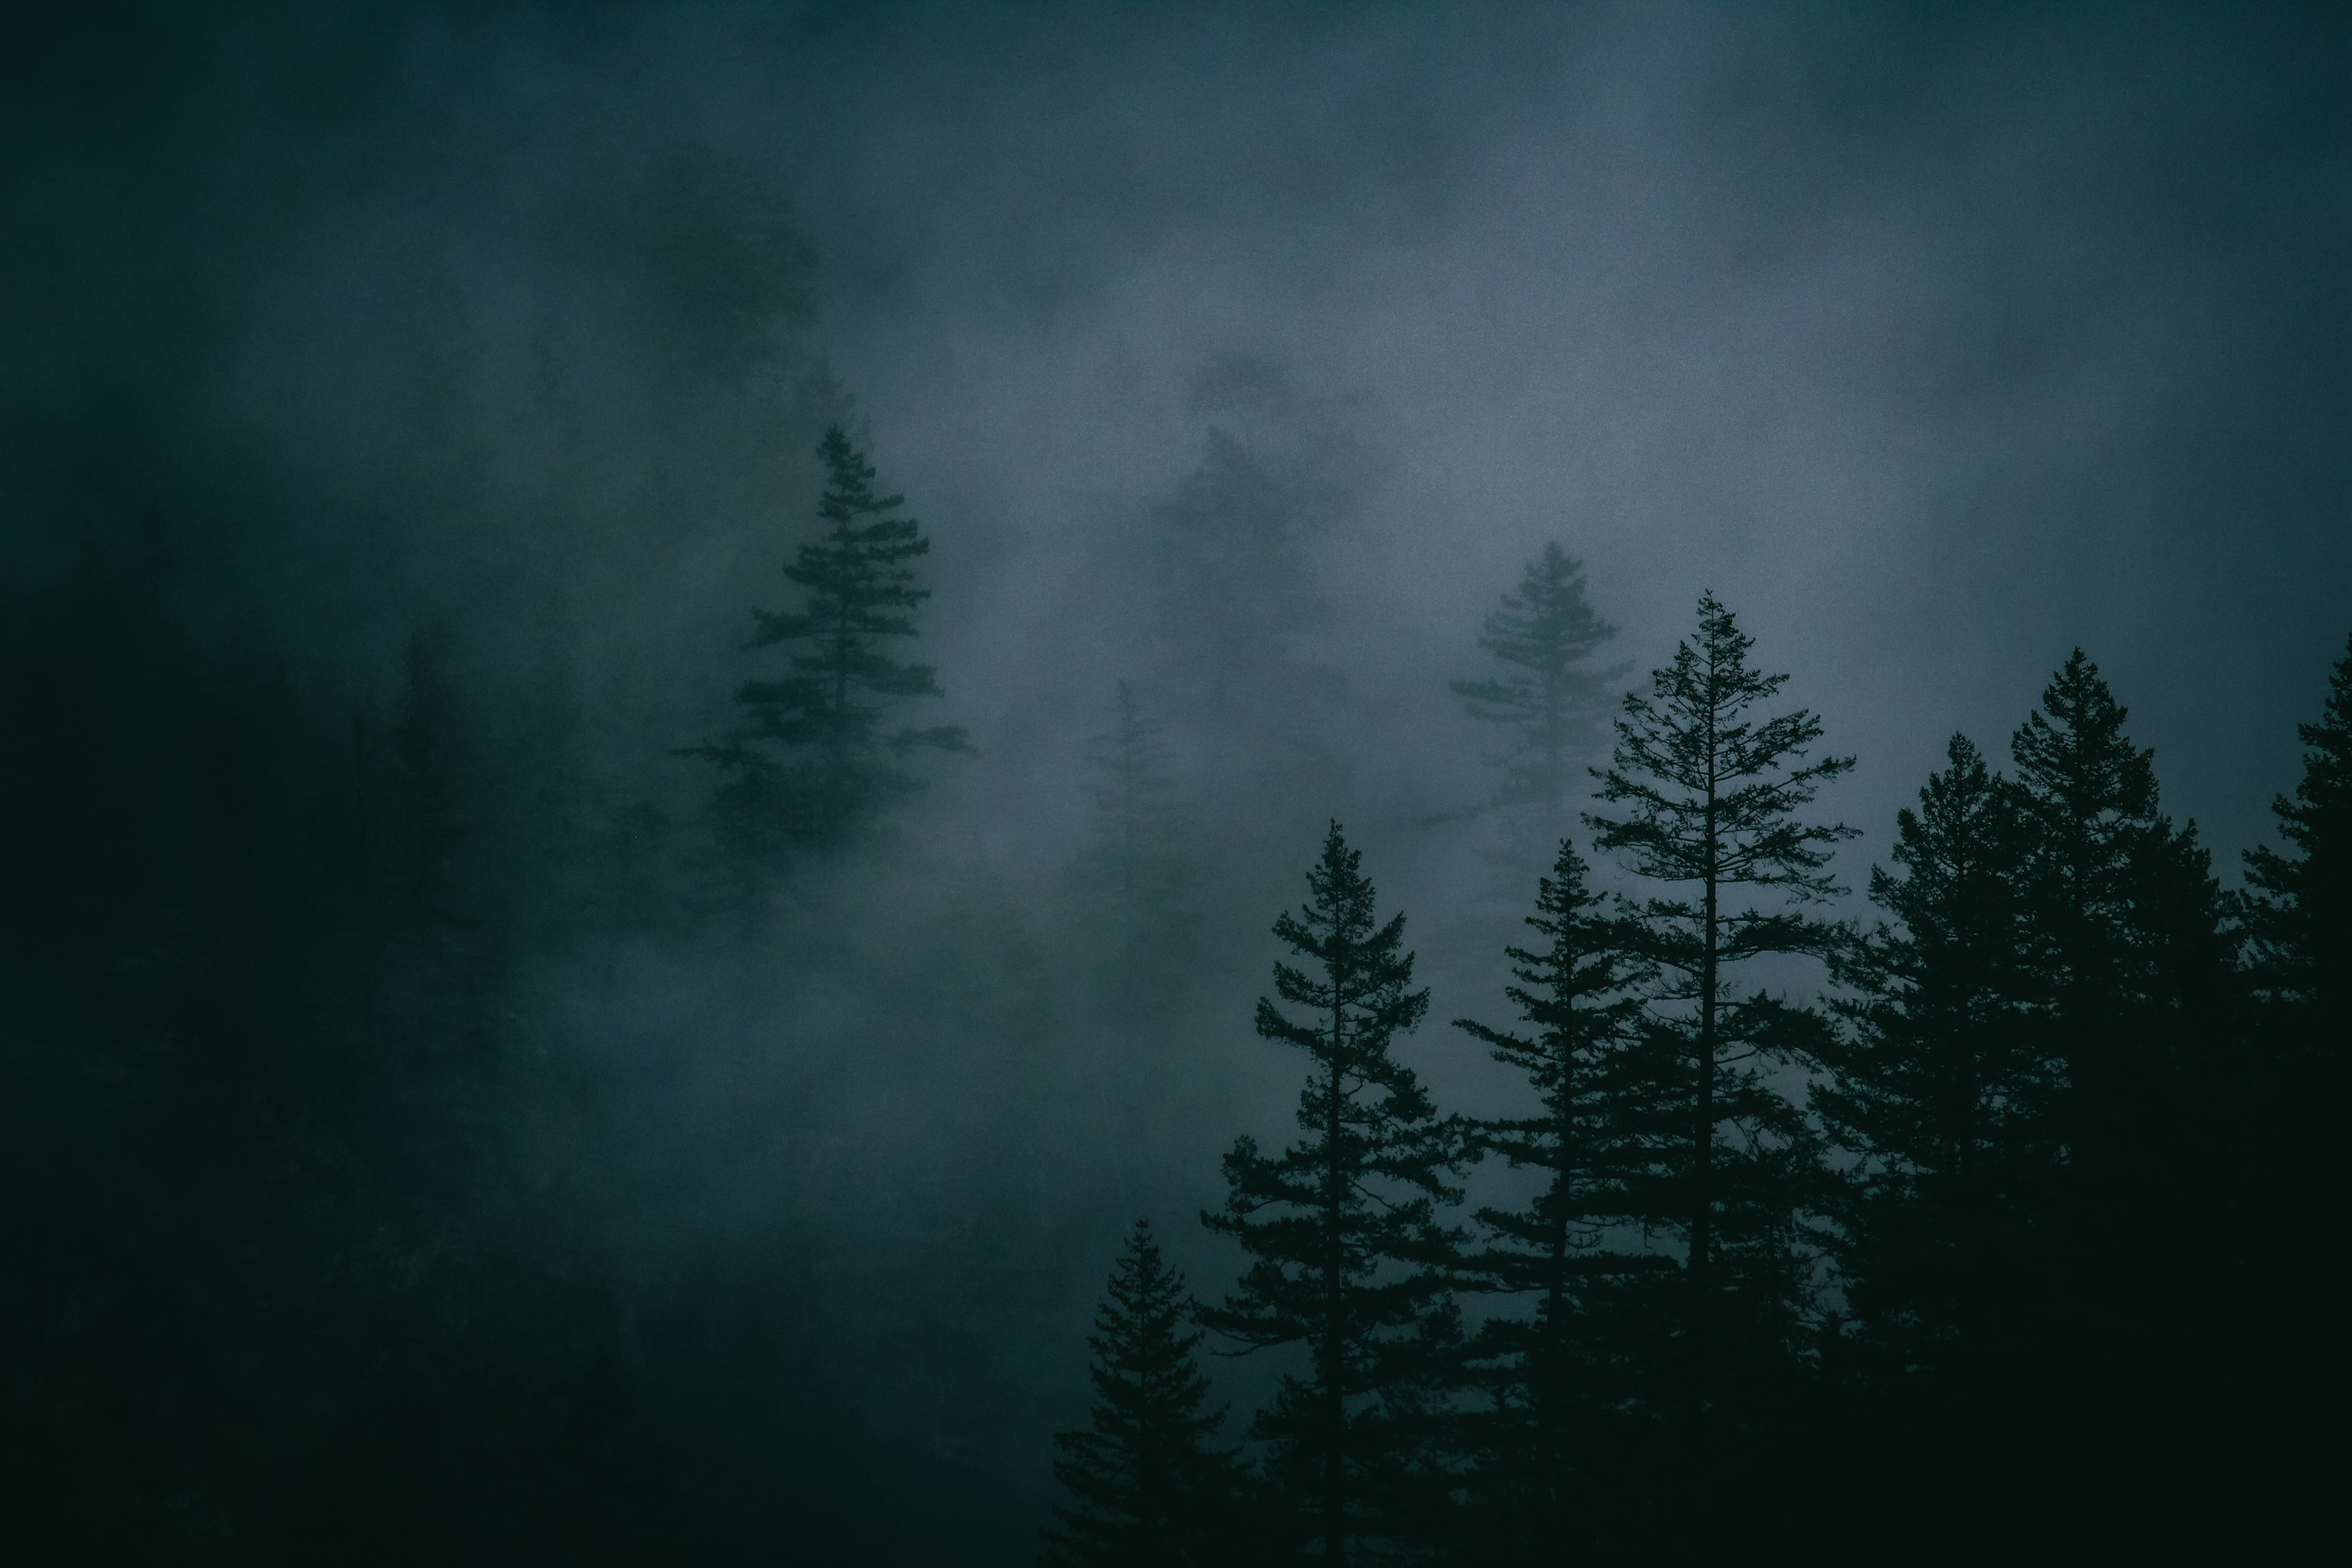 A Foggy Forest